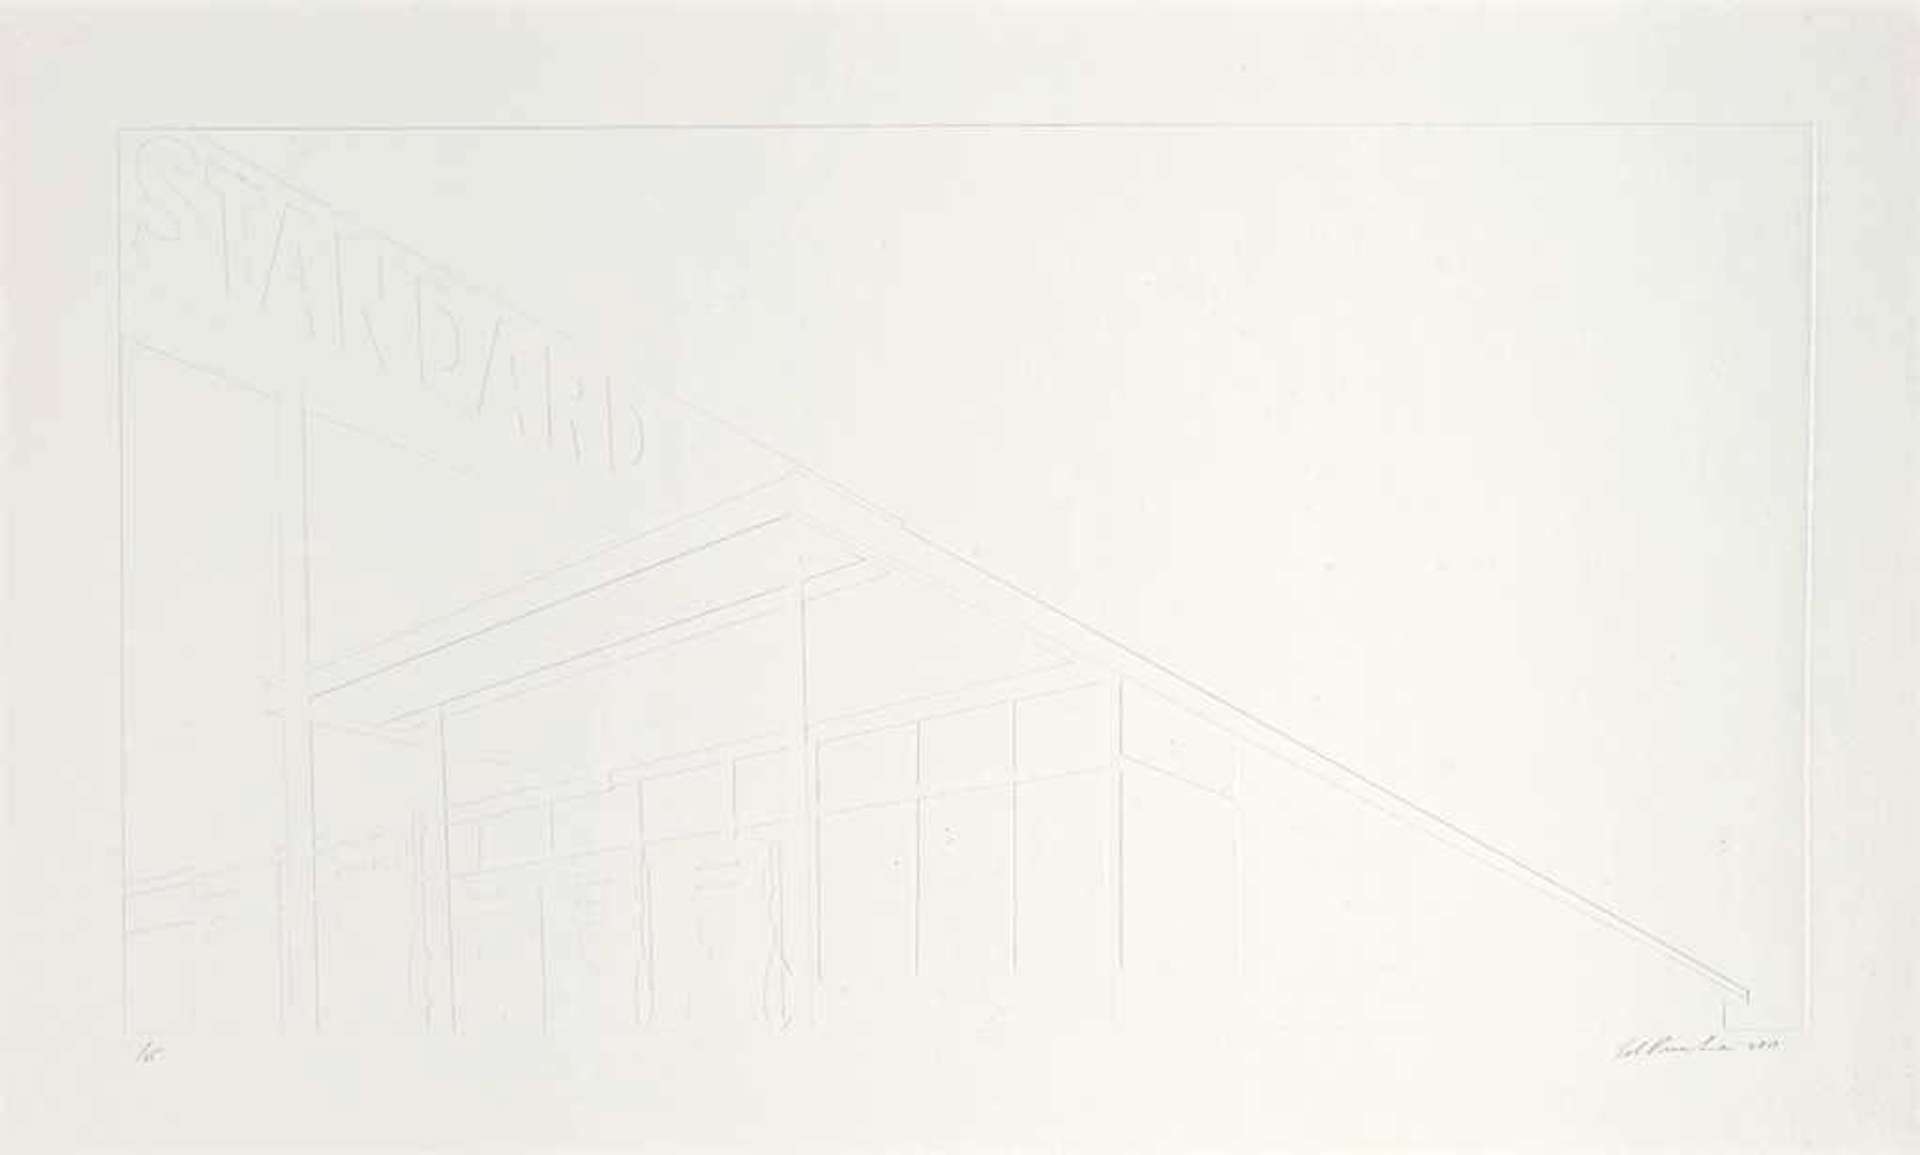 Ed Ruscha: Ghost Station - Signed Print